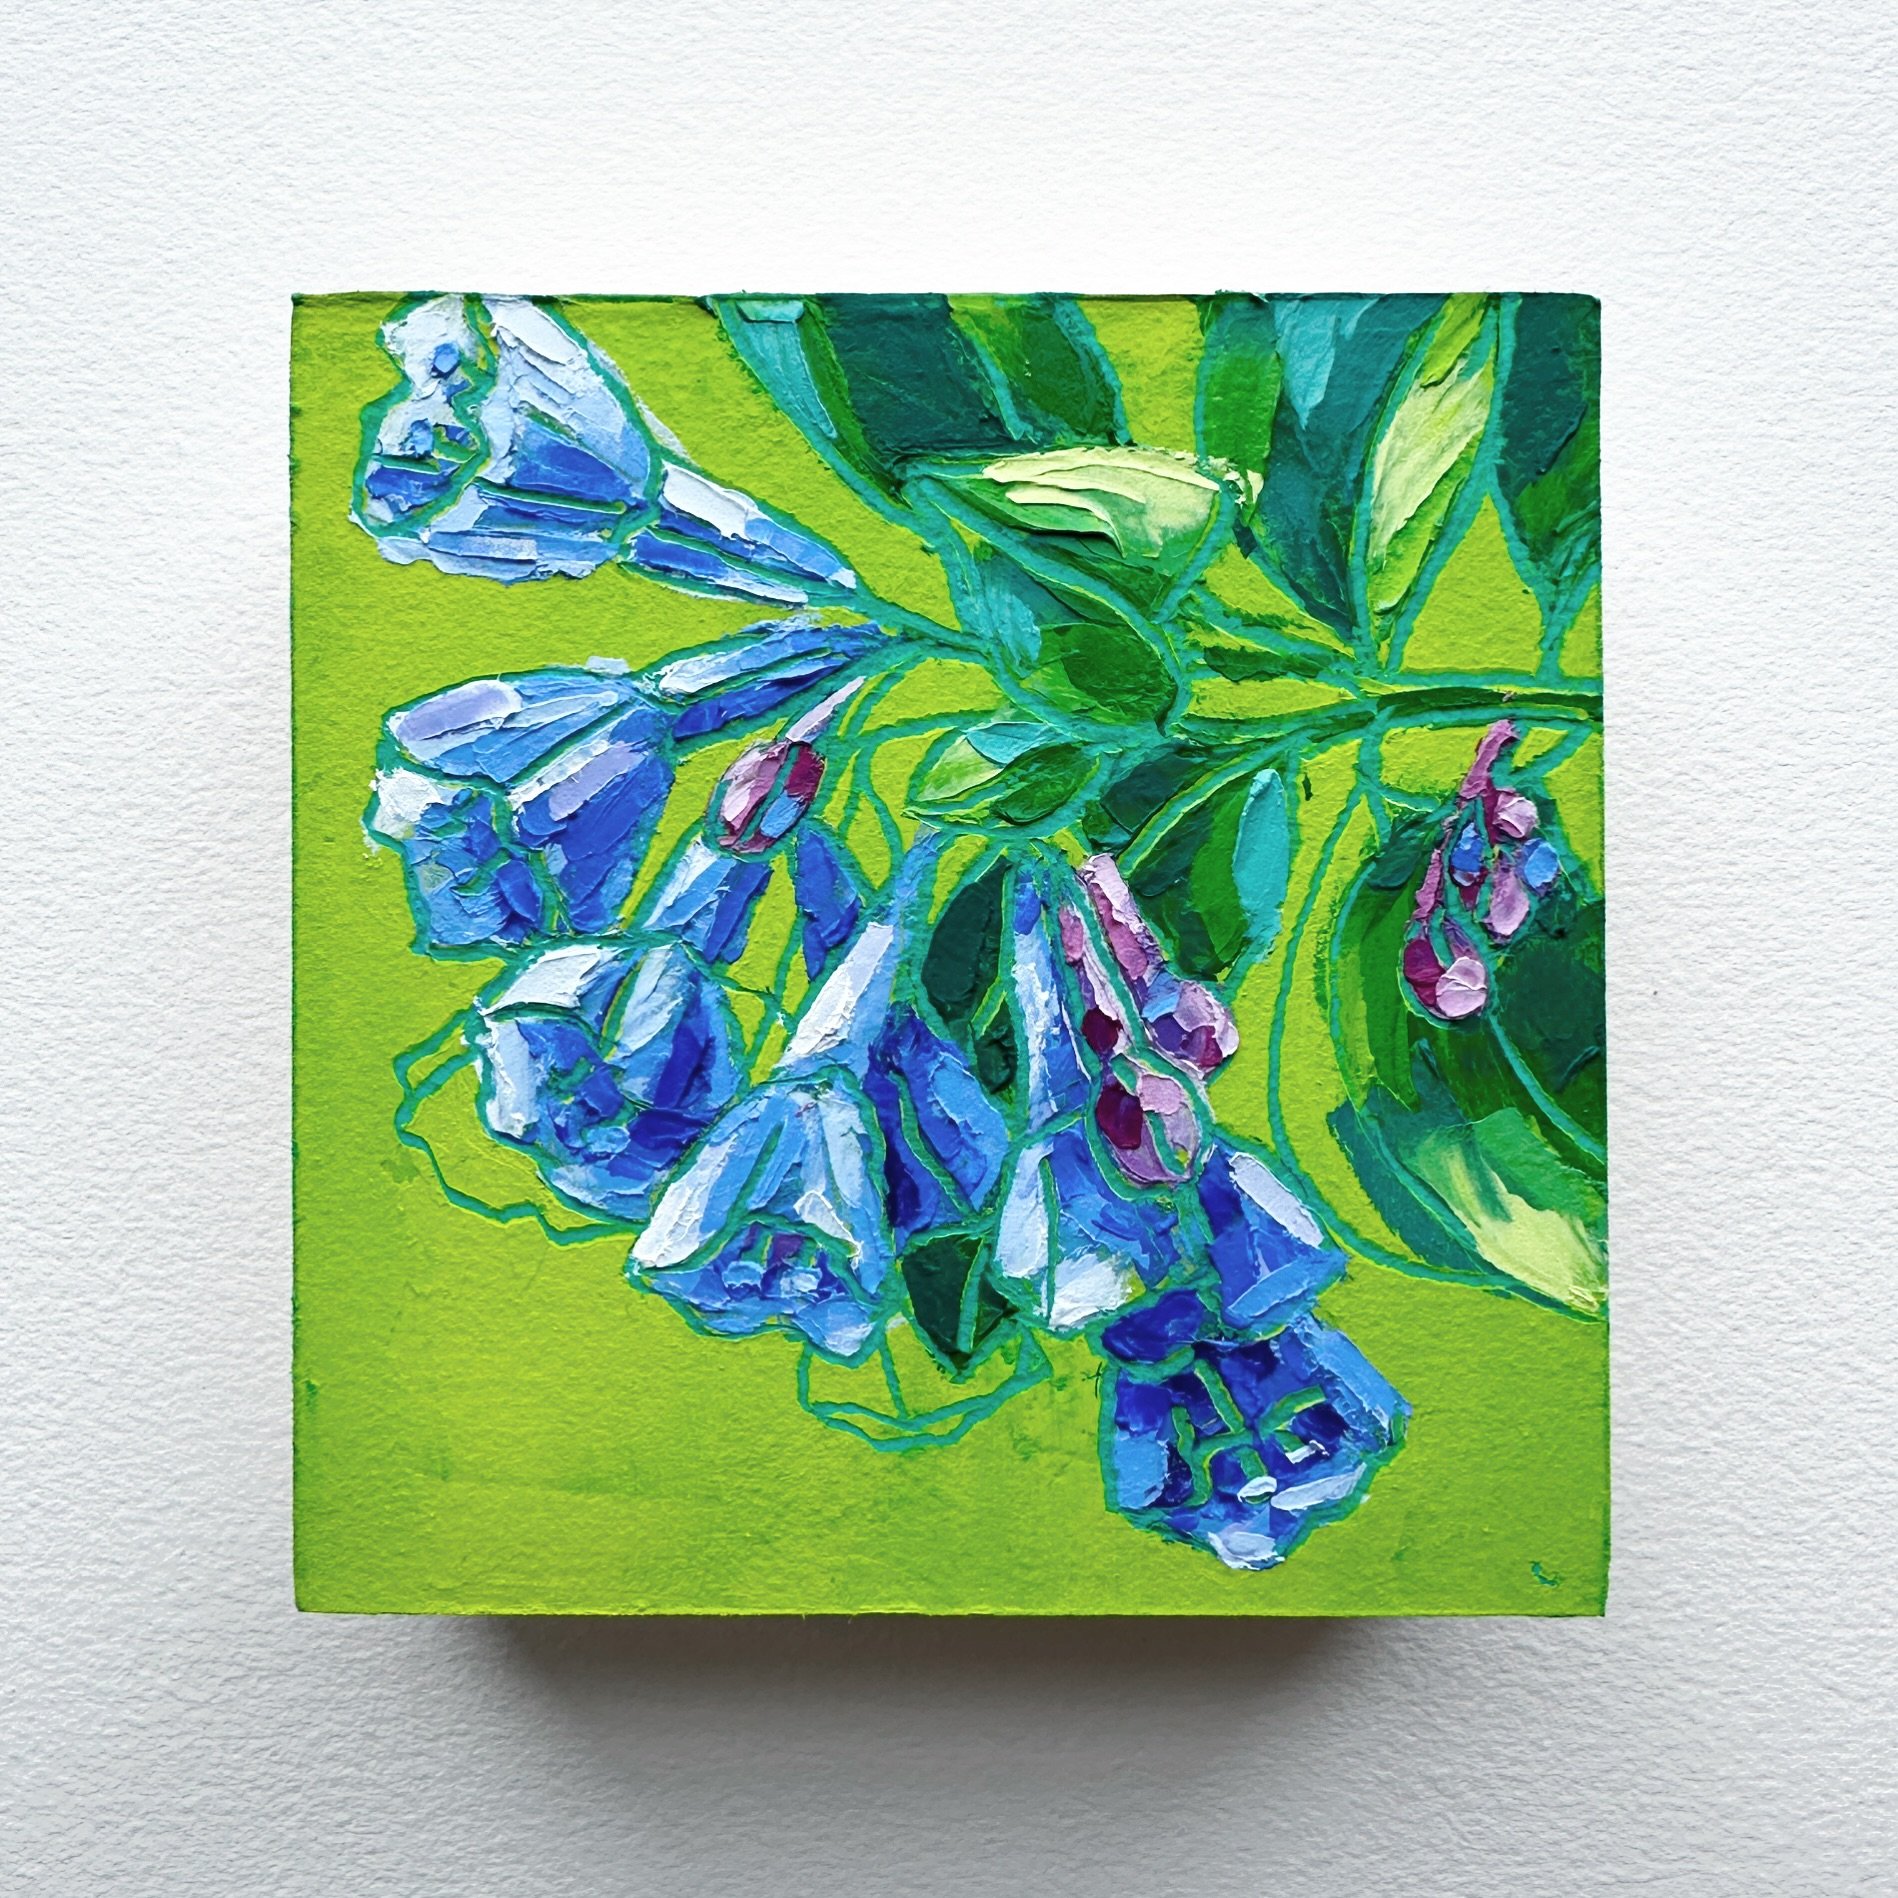 Day 50, The 100 Day Project 2024 @dothe100dayproject

Celebrating the halfway point in my 100 Day Project journey (whoop!) with Bluebells &amp; Cobalt Blue. My blue may be skewing a bit purple but at the time of mixing it definitely appeared cobalt, 